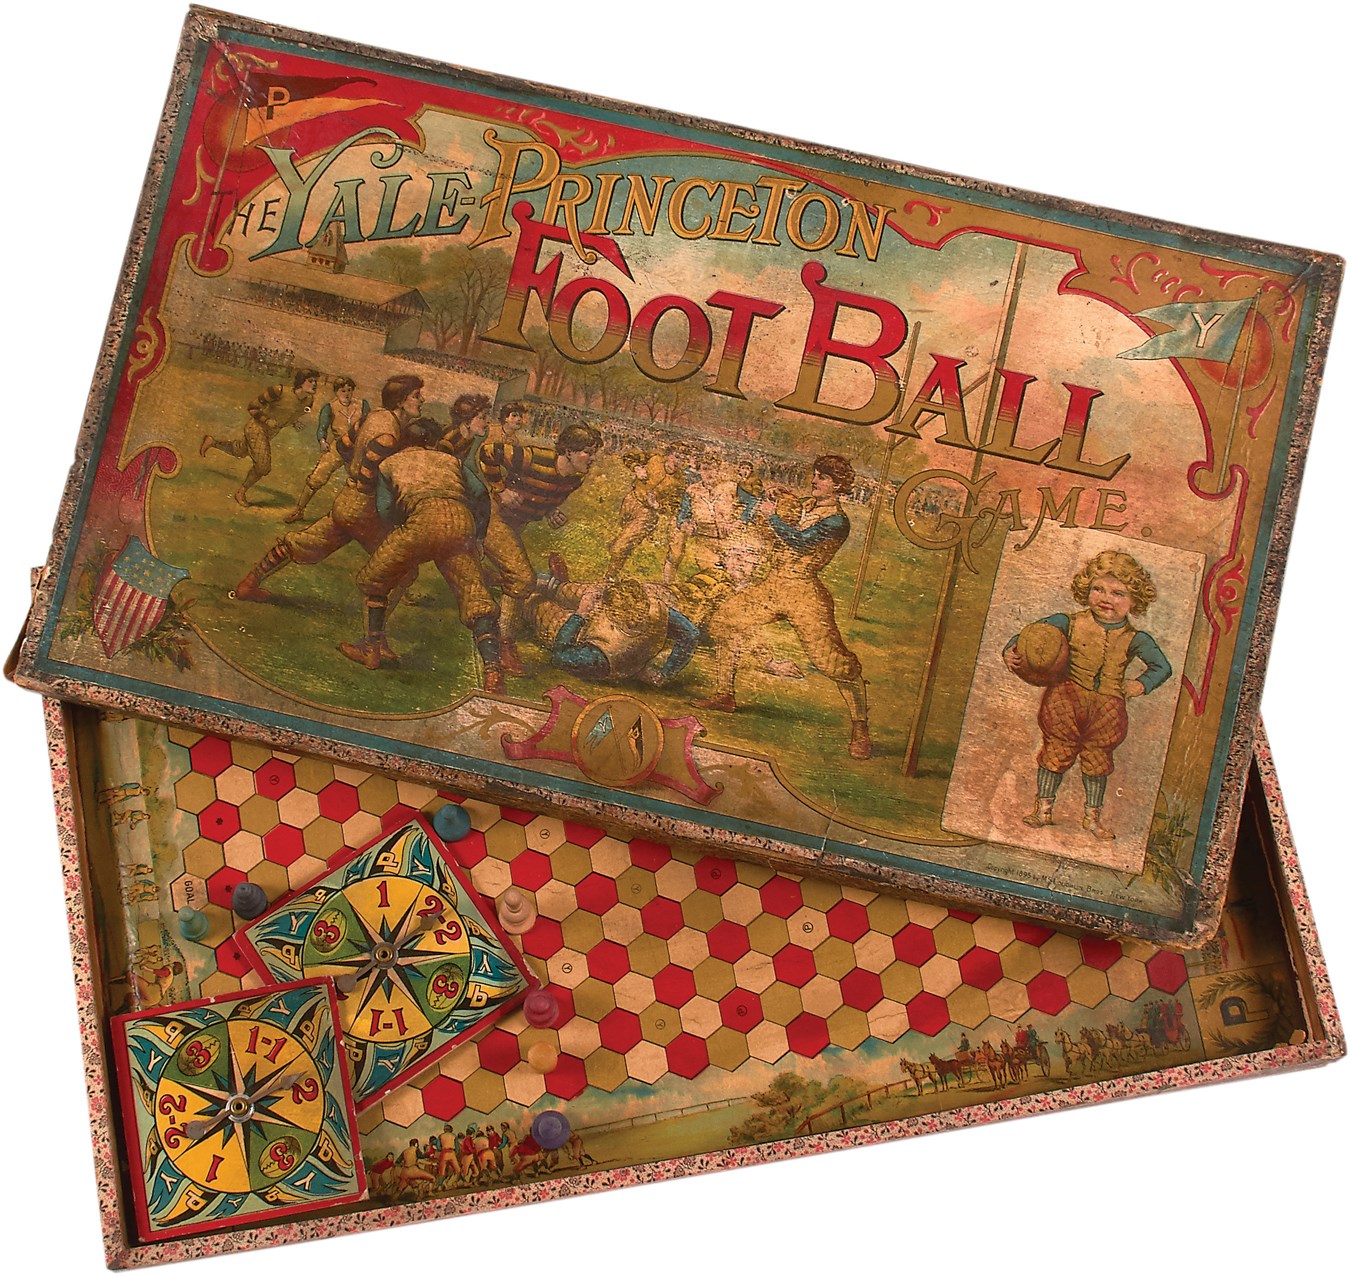 1895 Yale-Princeton Football Game by McLoughlin